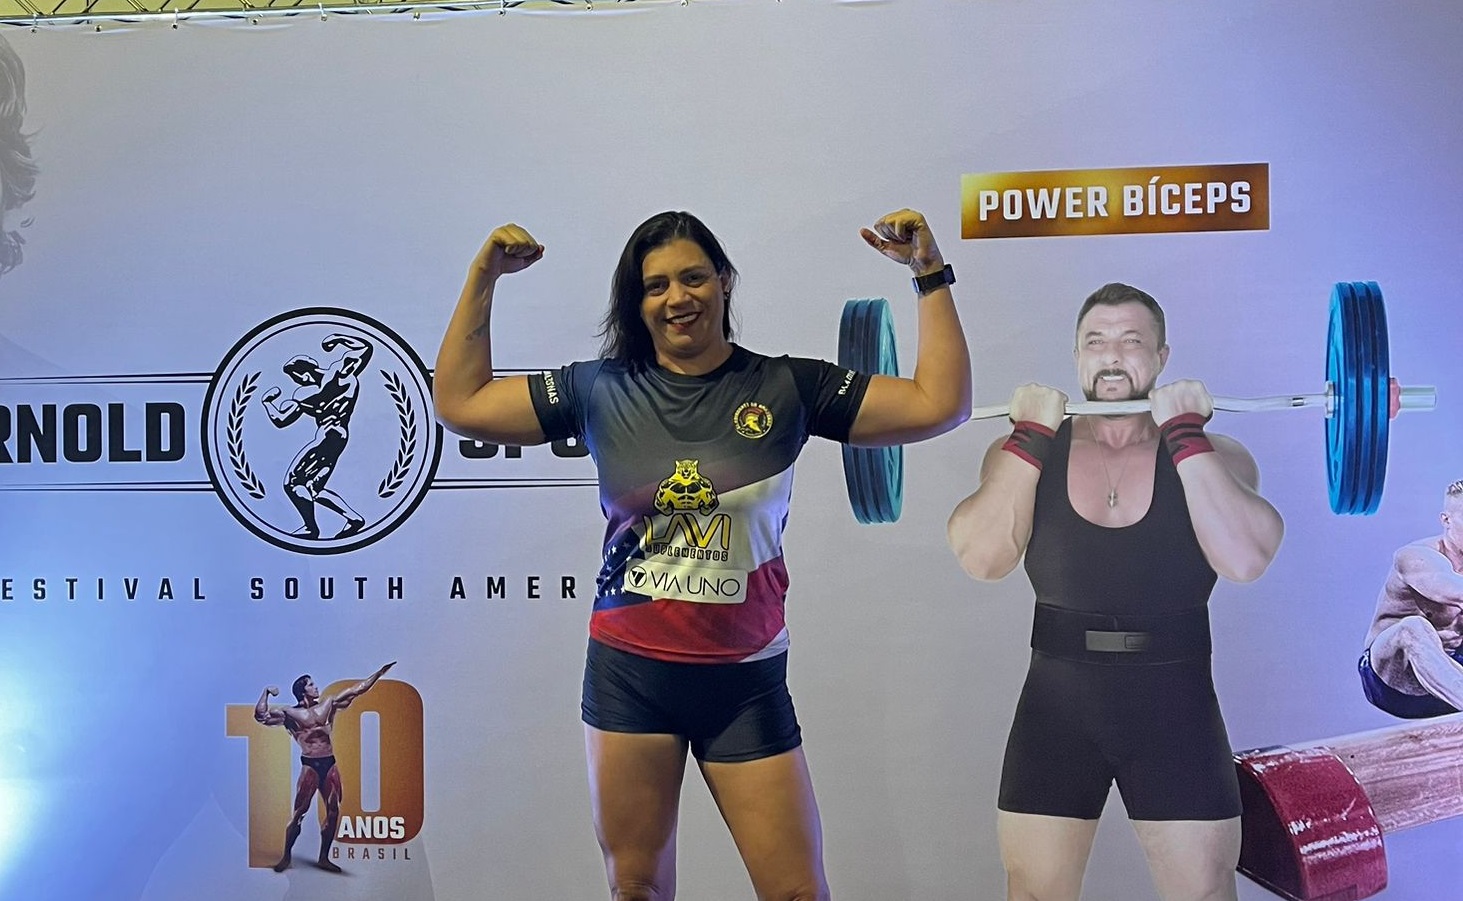 Amazonian athlete featured in powerlifting dreams of reaching world competitions